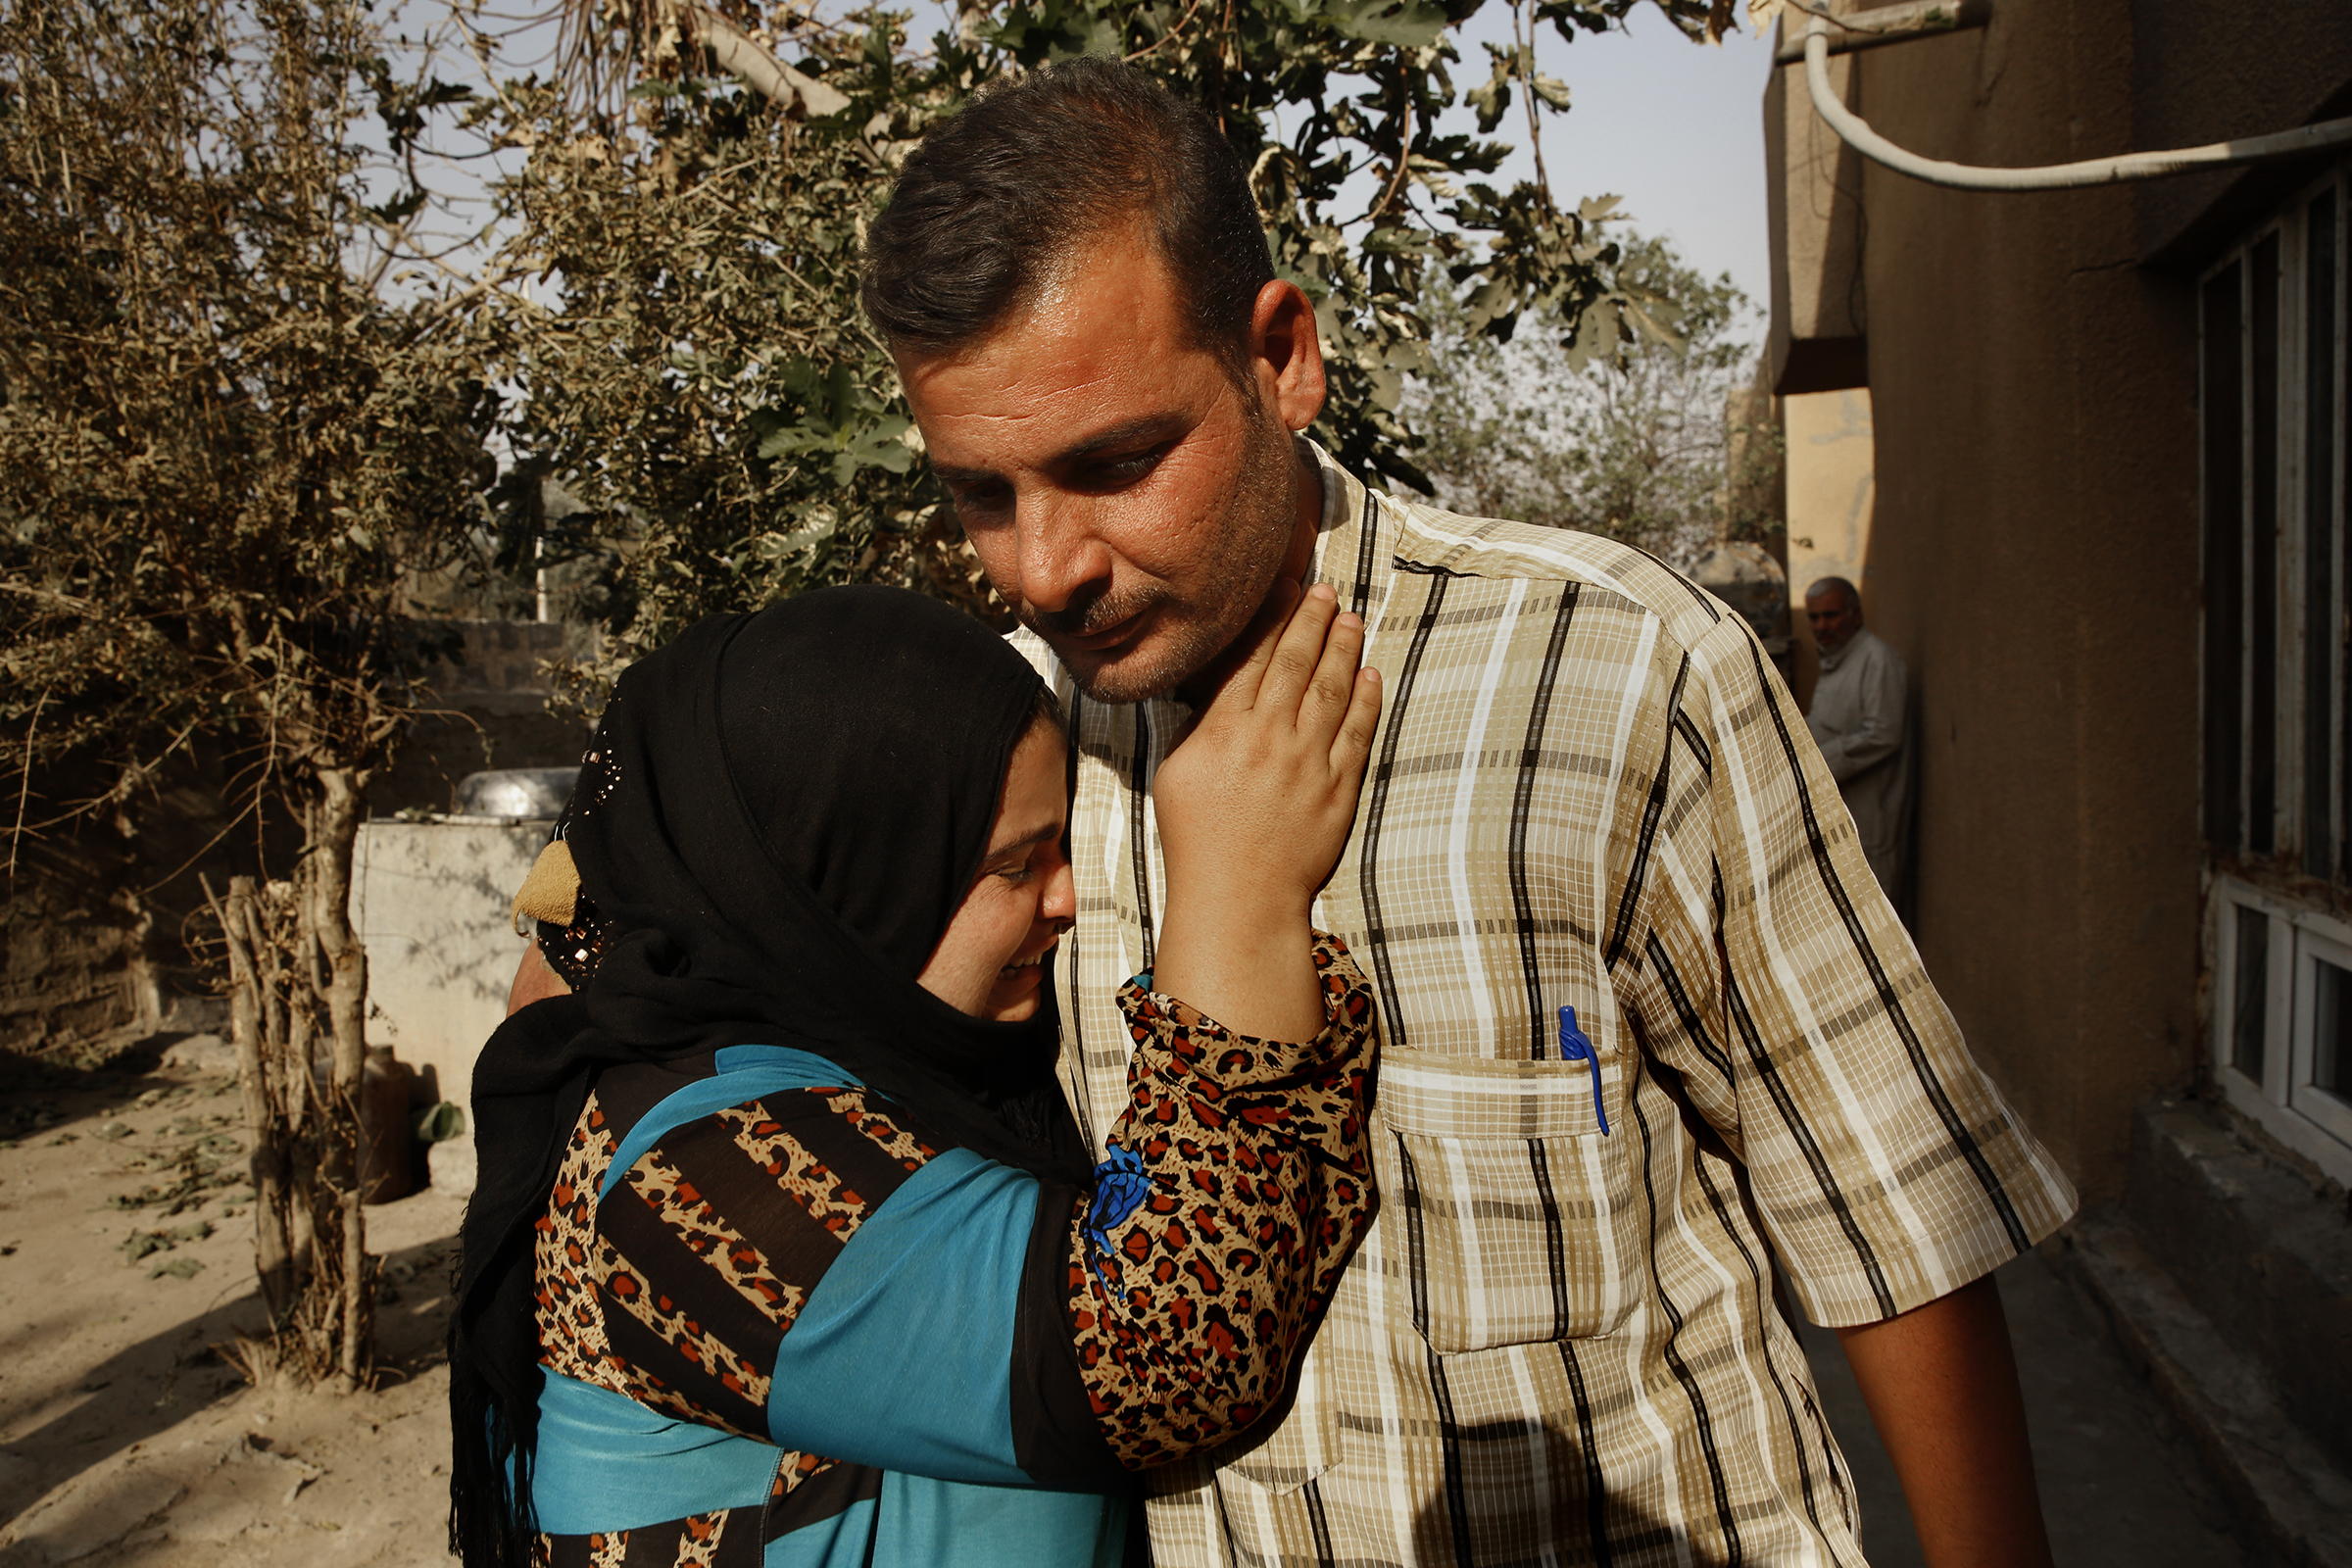 Going home in Iraq: Tearful reunions and a touch of fear